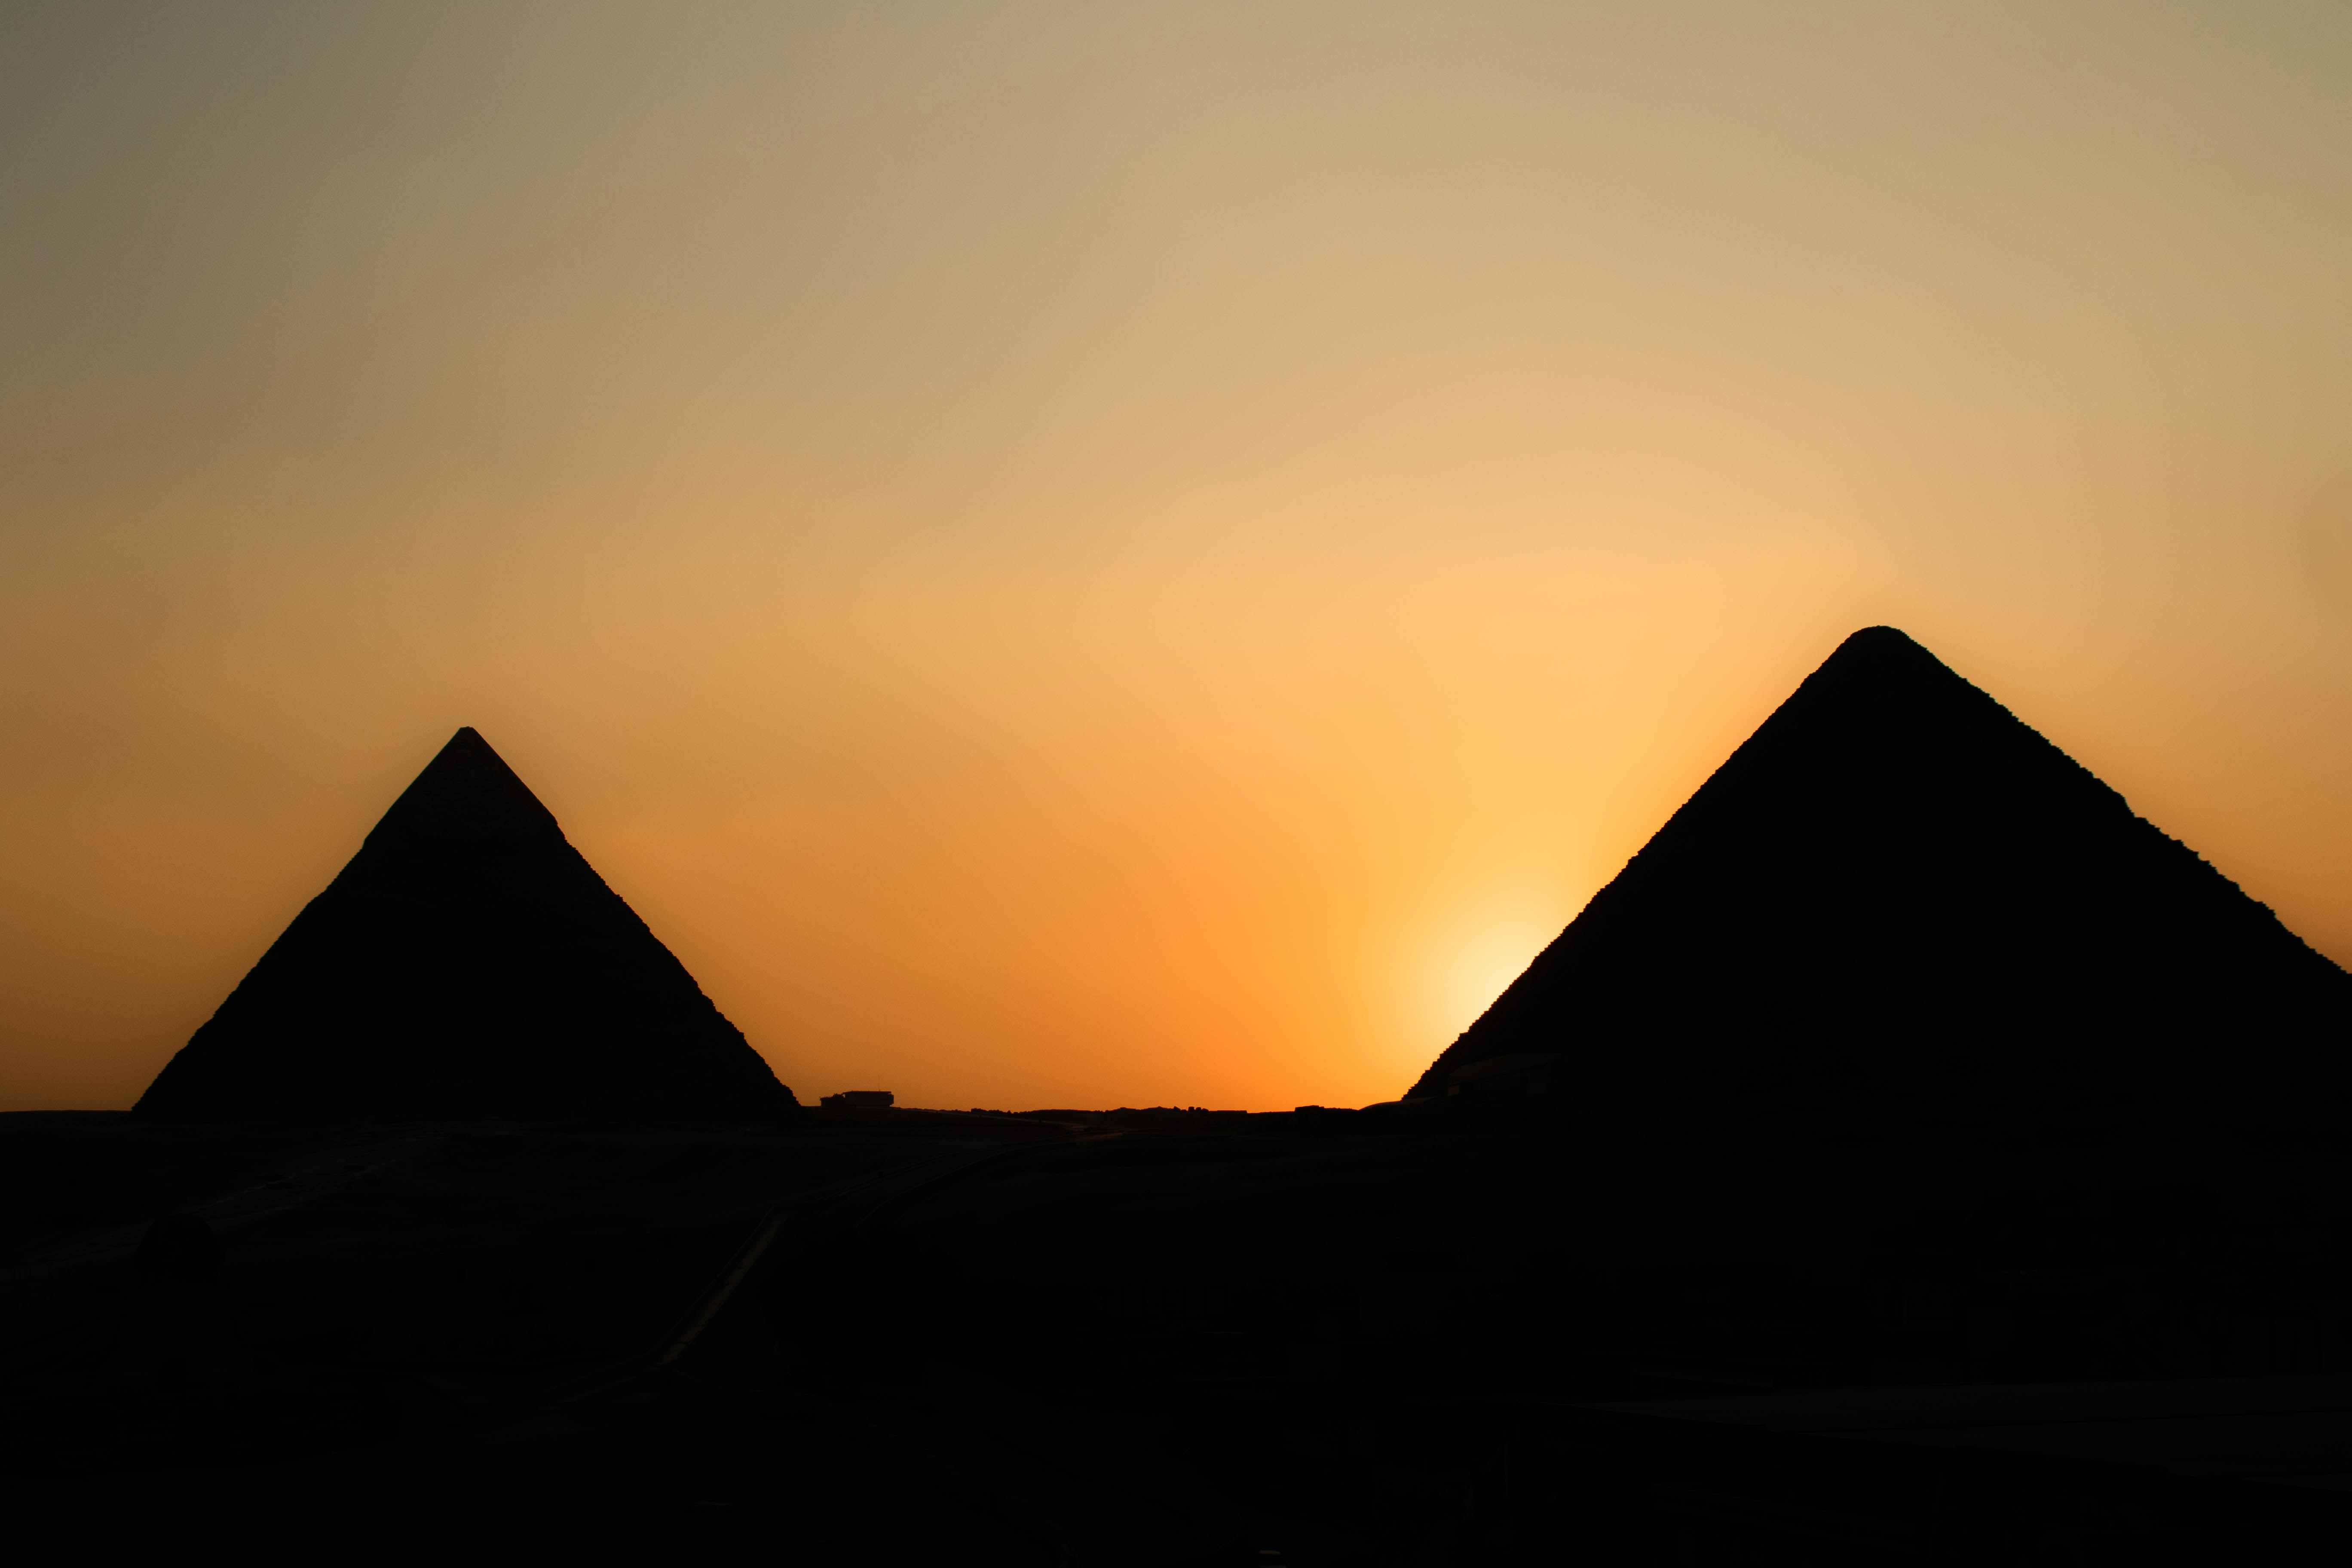 Two Egyptian pyramids dark with the sun setting behind them